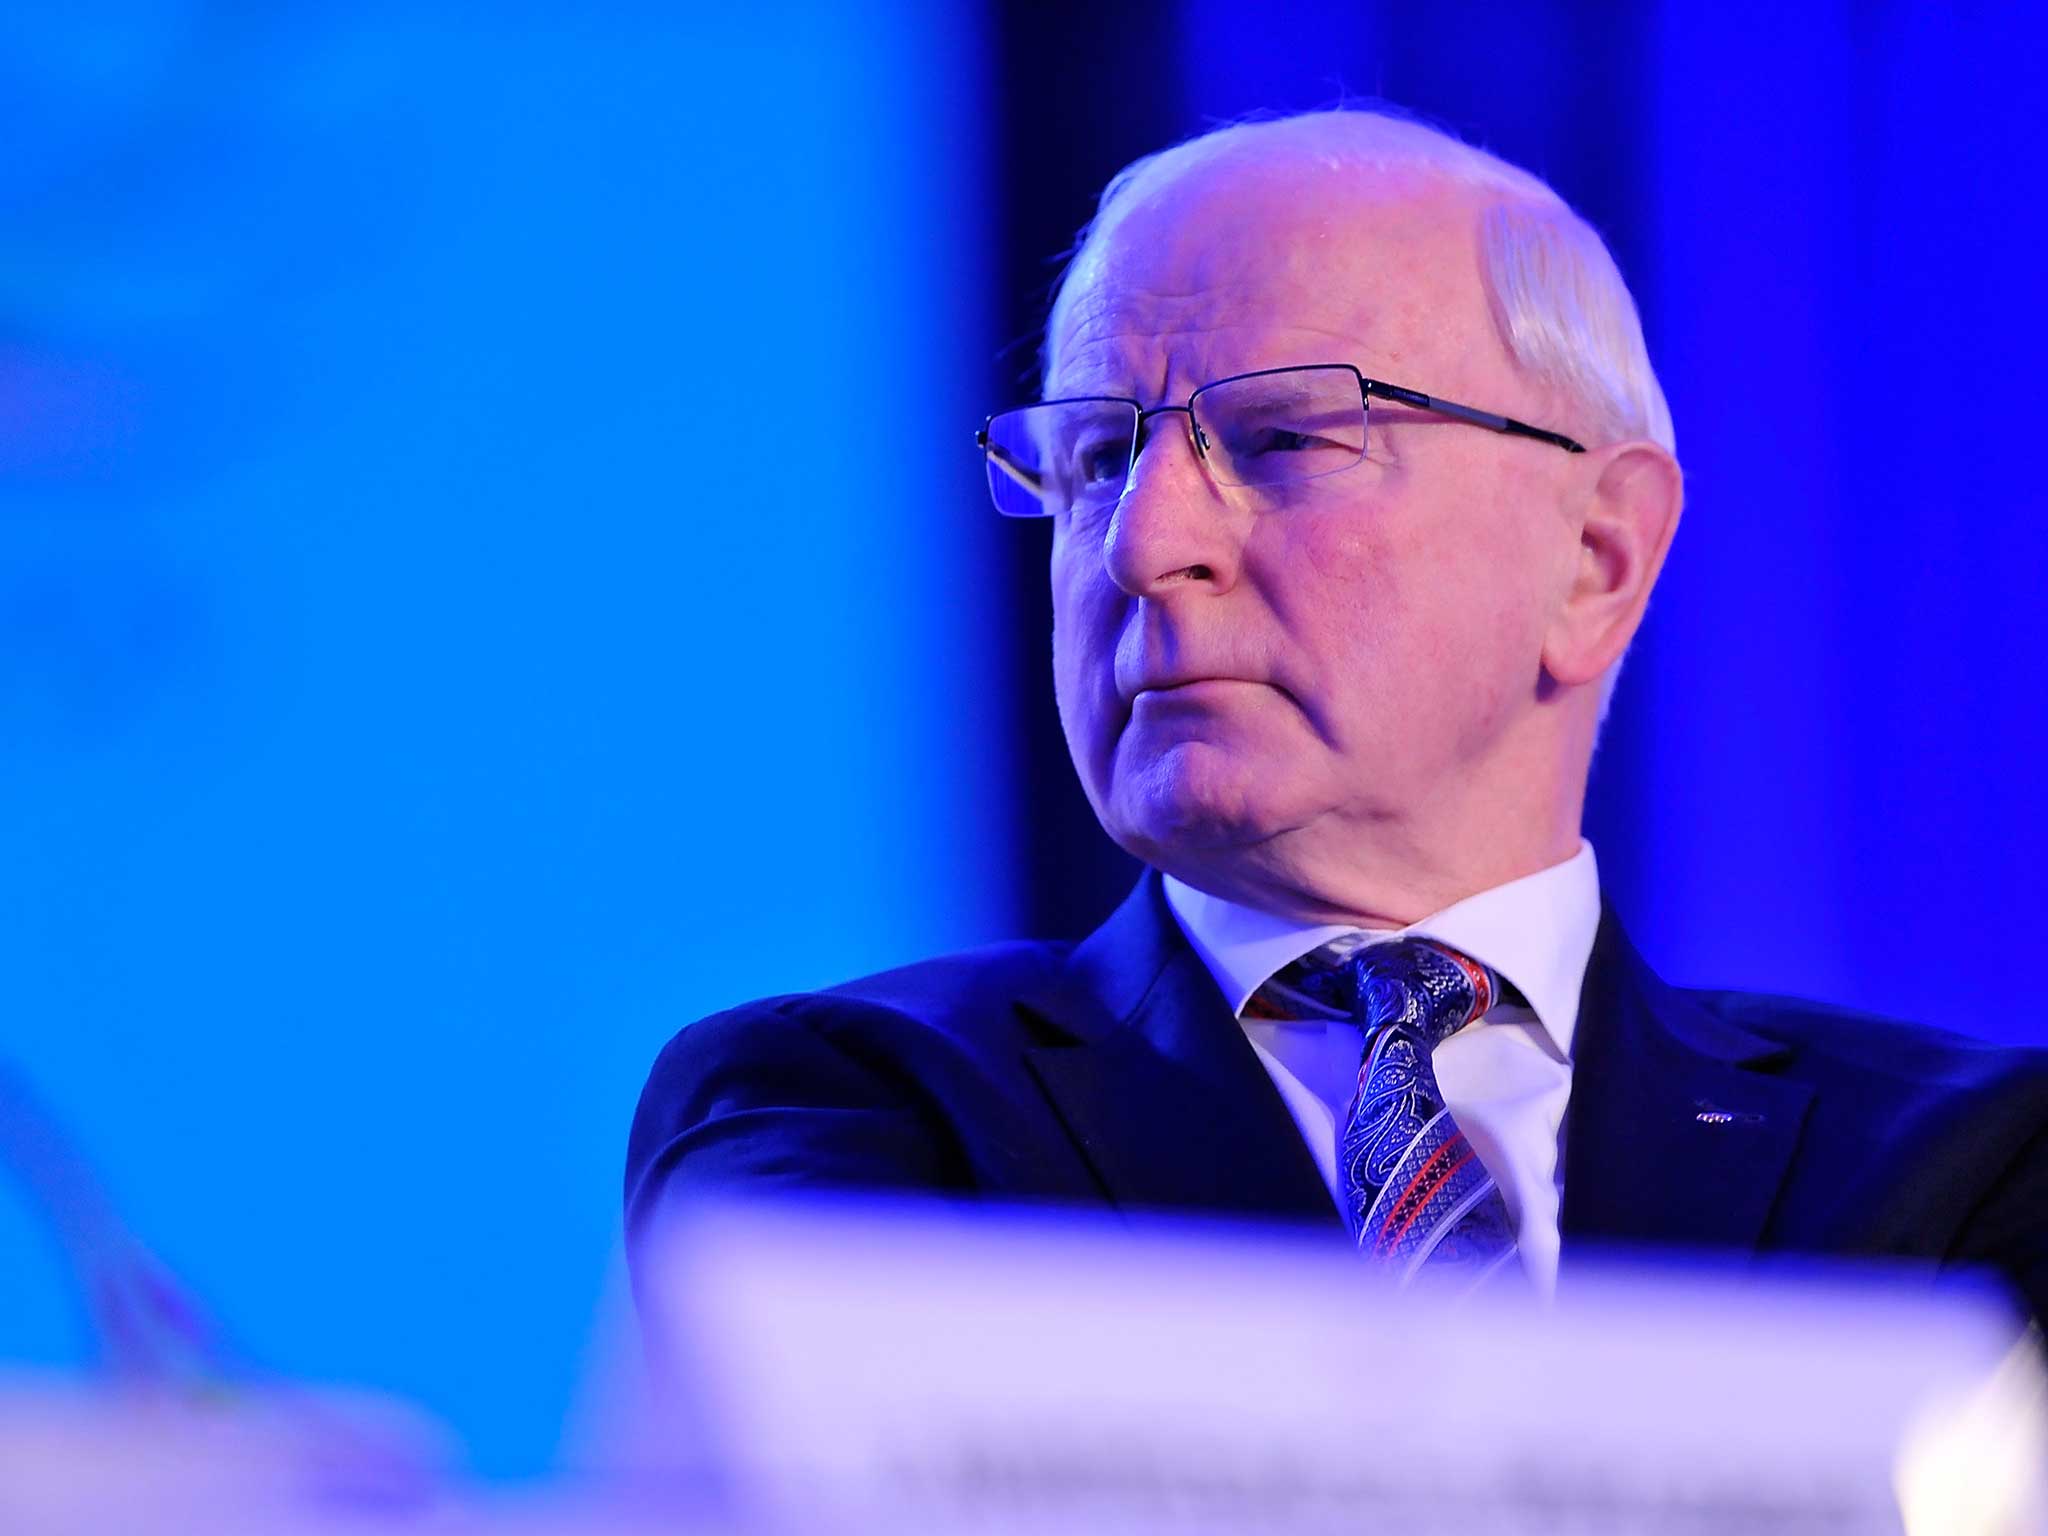 Patrick Hickey is one of Europe's most senior Olympic officials